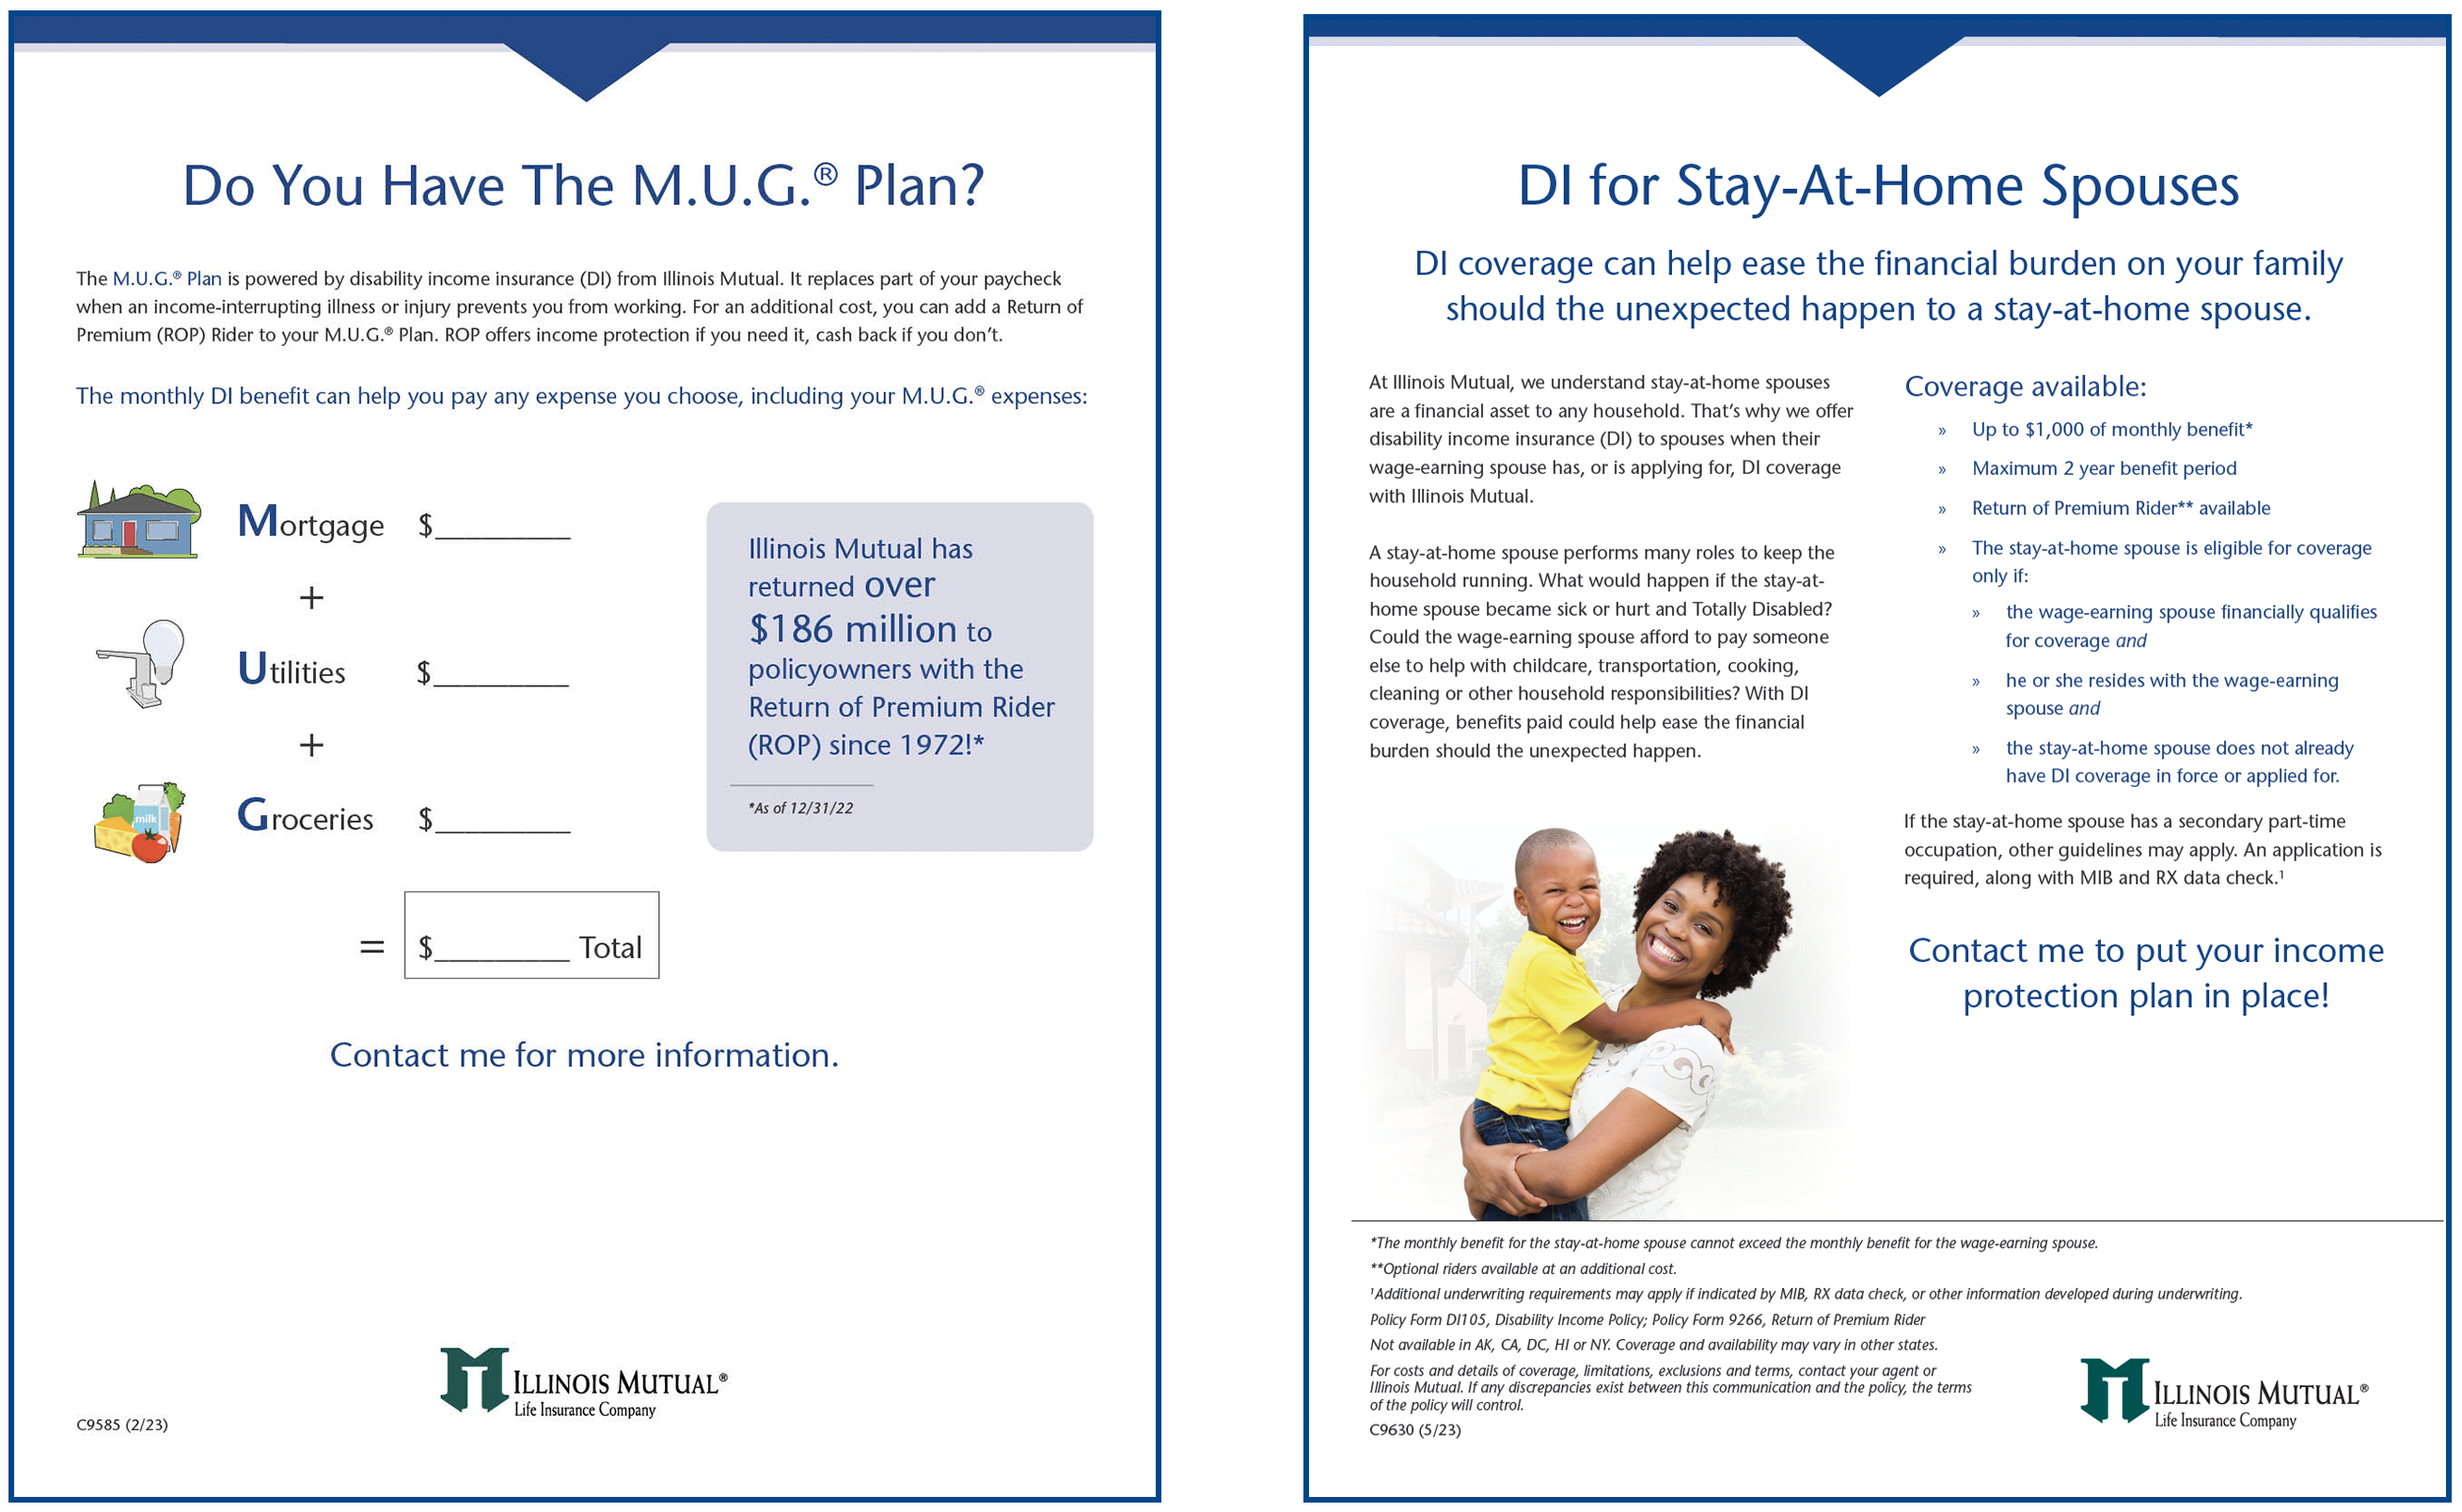 MUG Plan and DI for Stay-at-Home Spouses flyer thumbnails